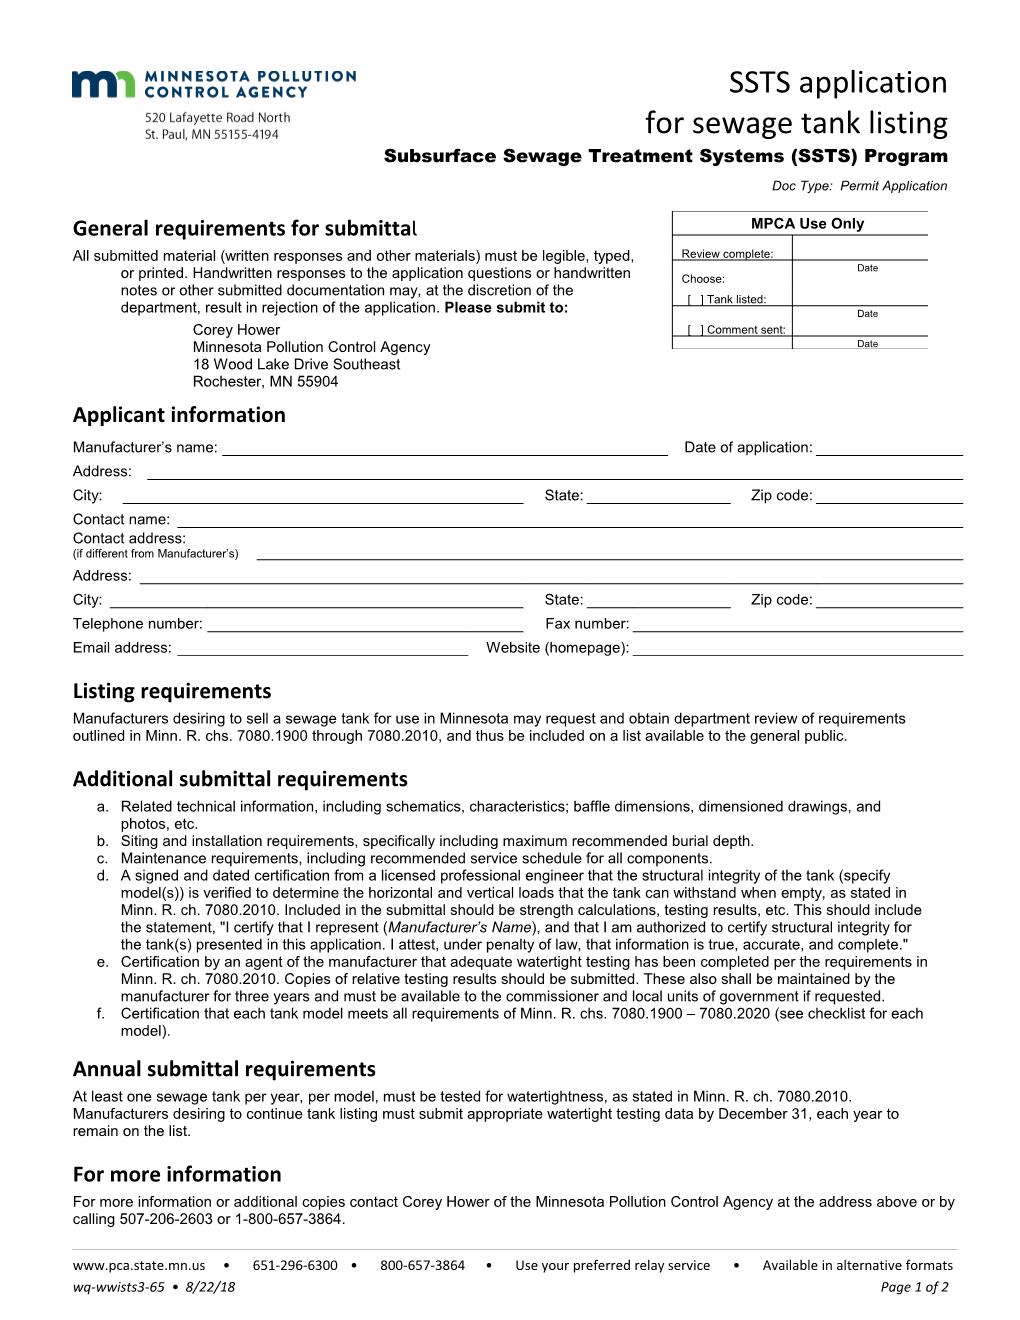 SSTS Application for Sewage Tank Listing - Subsurface Sewage Treatment Systems (SSTS) Program